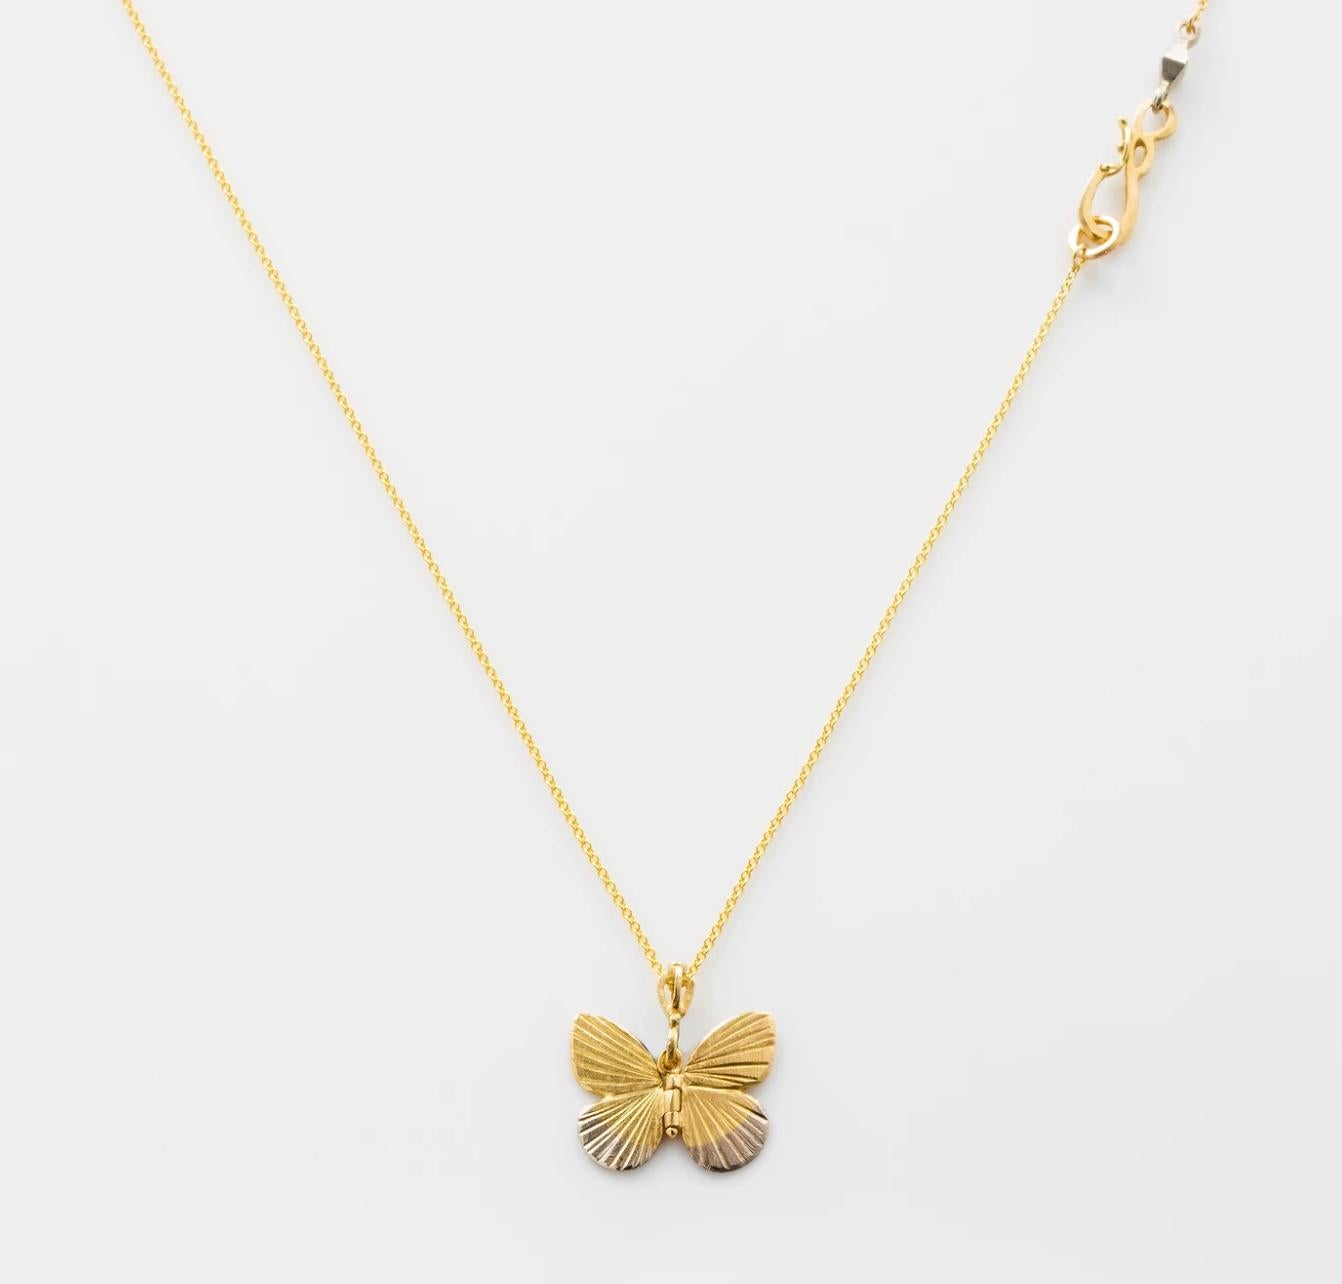 James Banks's signature butterfly necklace features a Baby Asterope butterfly with a hinge at the center to allow movement of the wings, set in 18k Yellow Gold with 18k White Gold tips and hung on an 18k yellow Gold Chain with a secure clasp